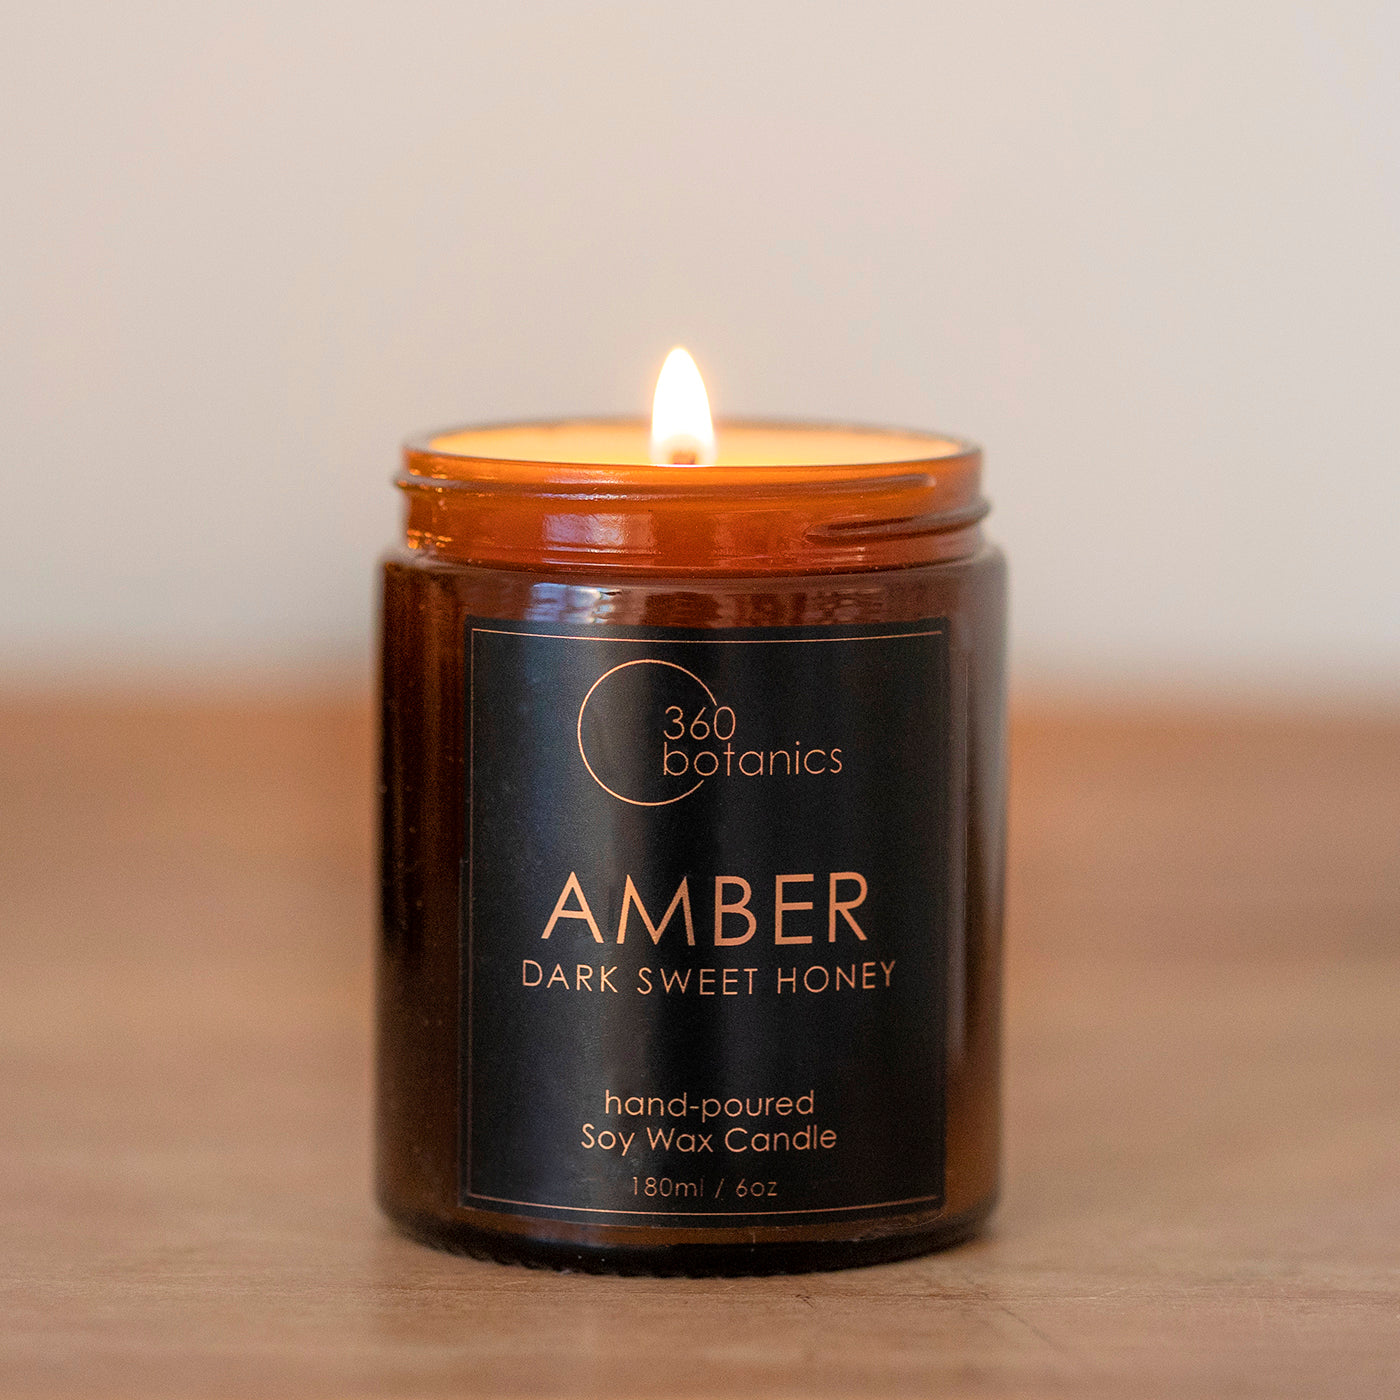 A lit 360 Botanics Amber hand-poured soy wax candle in a dark glass jar, labeled 'Dark Sweet Honey' with a visible flame, on a warm background.